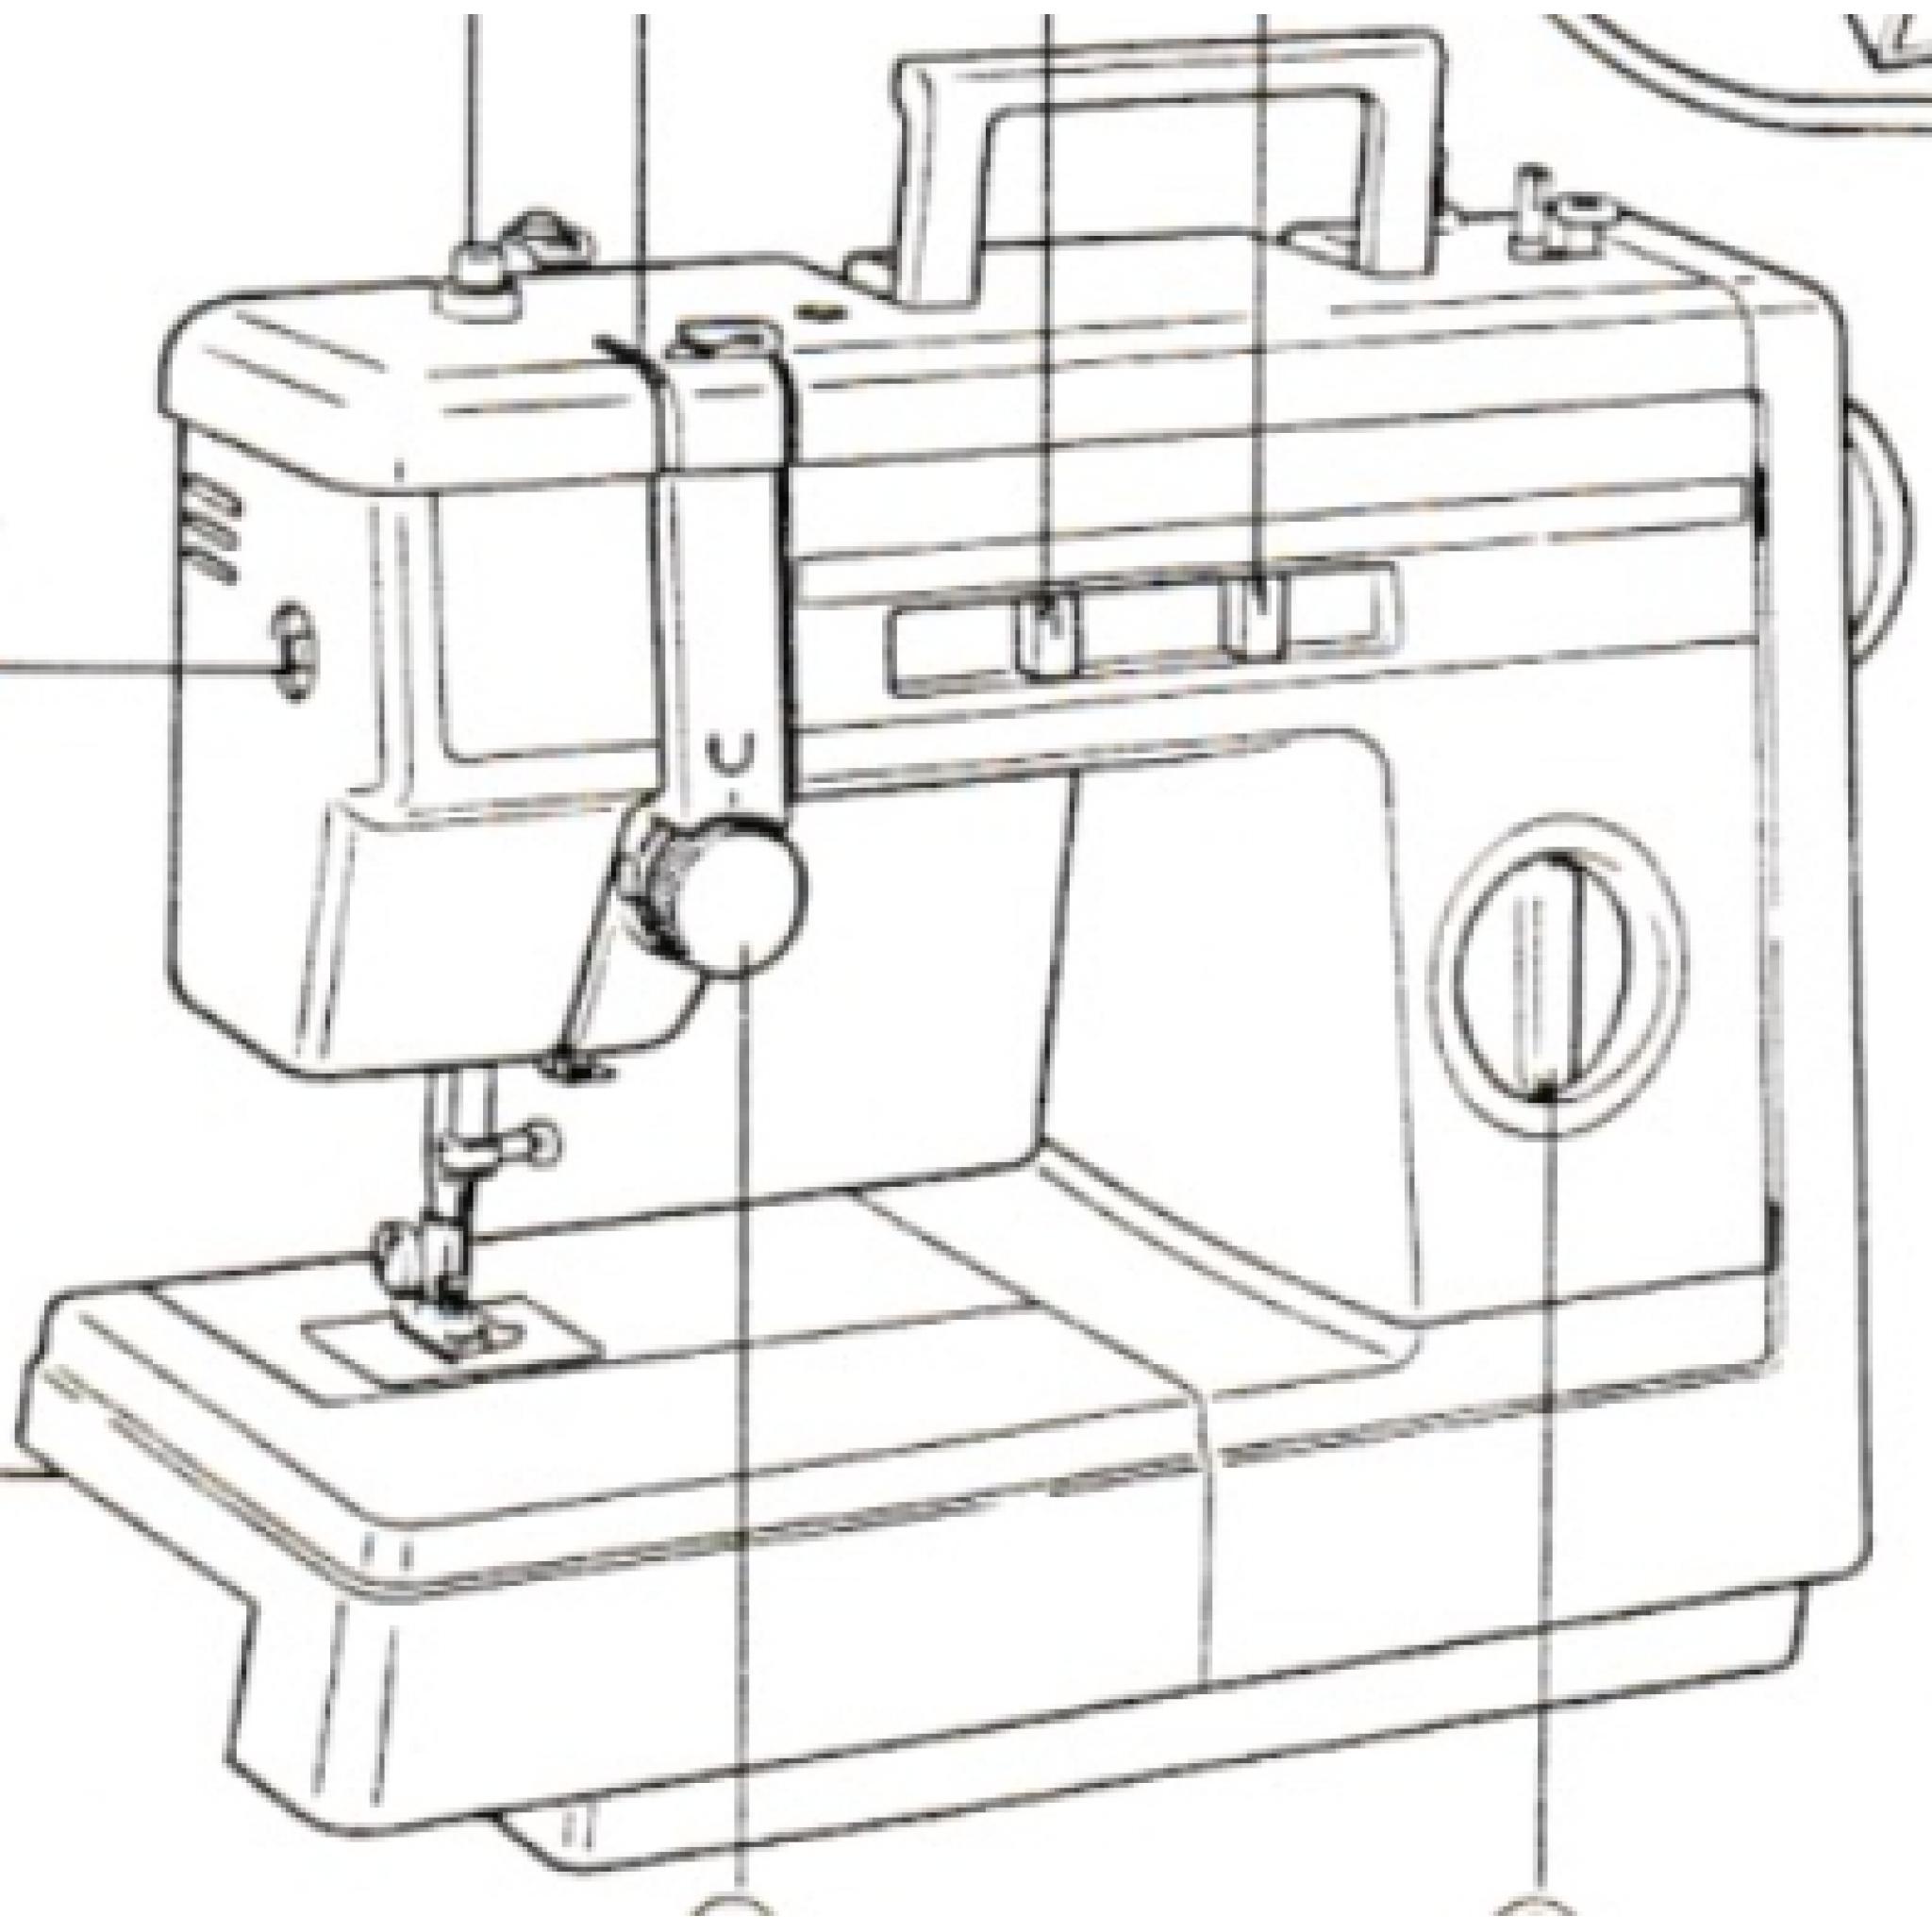 brother 781 sewing machine